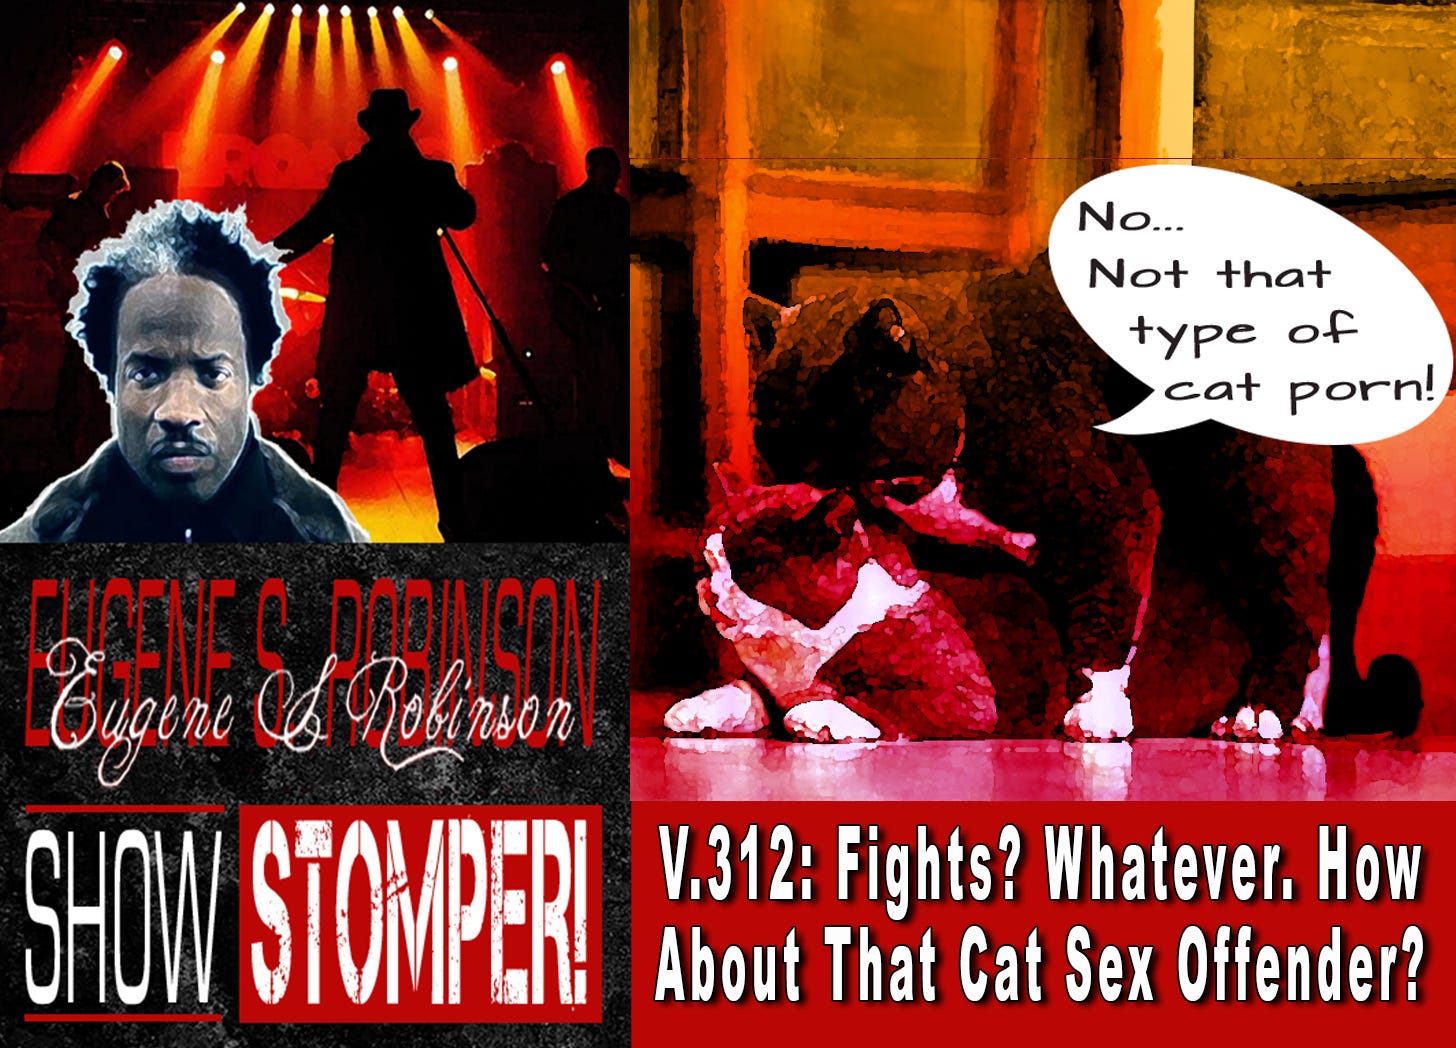 V.312: Fights? Whatever. How About That Cat Sex Offender? All On The Eugene S. Robinson Show Stomper!